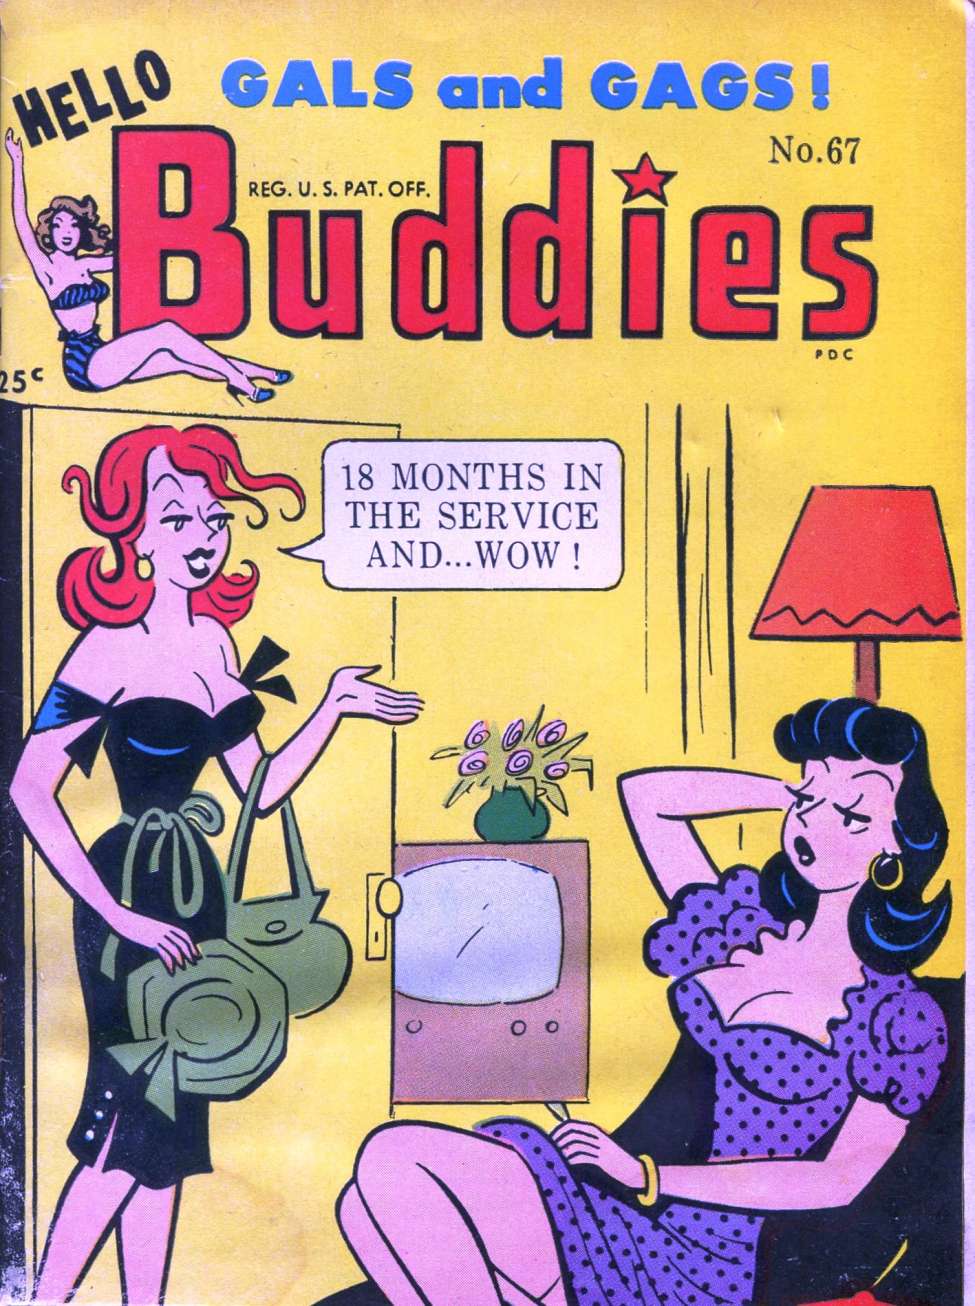 Book Cover For Hello Buddies 67